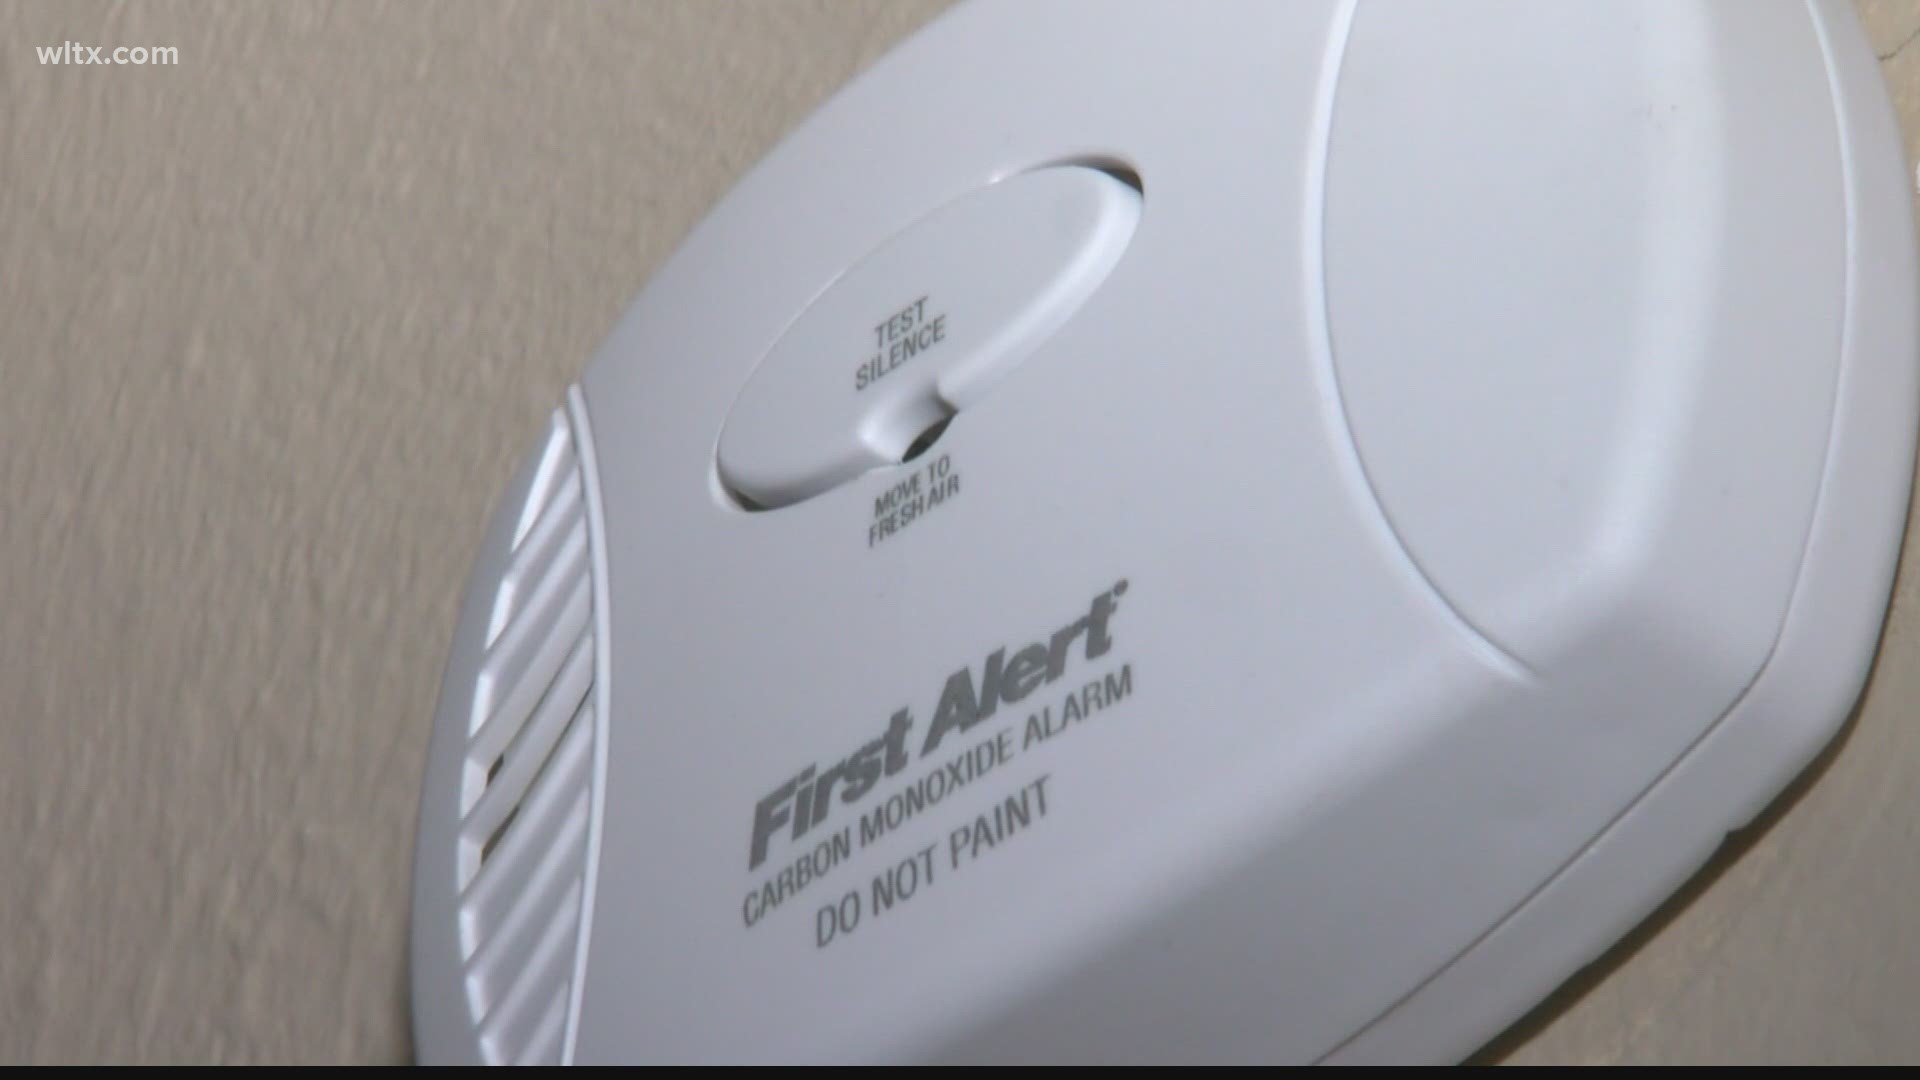 Carbon monoxide alarms and detectors will now be required in all public housing or public subsidized housing after multiple deaths.